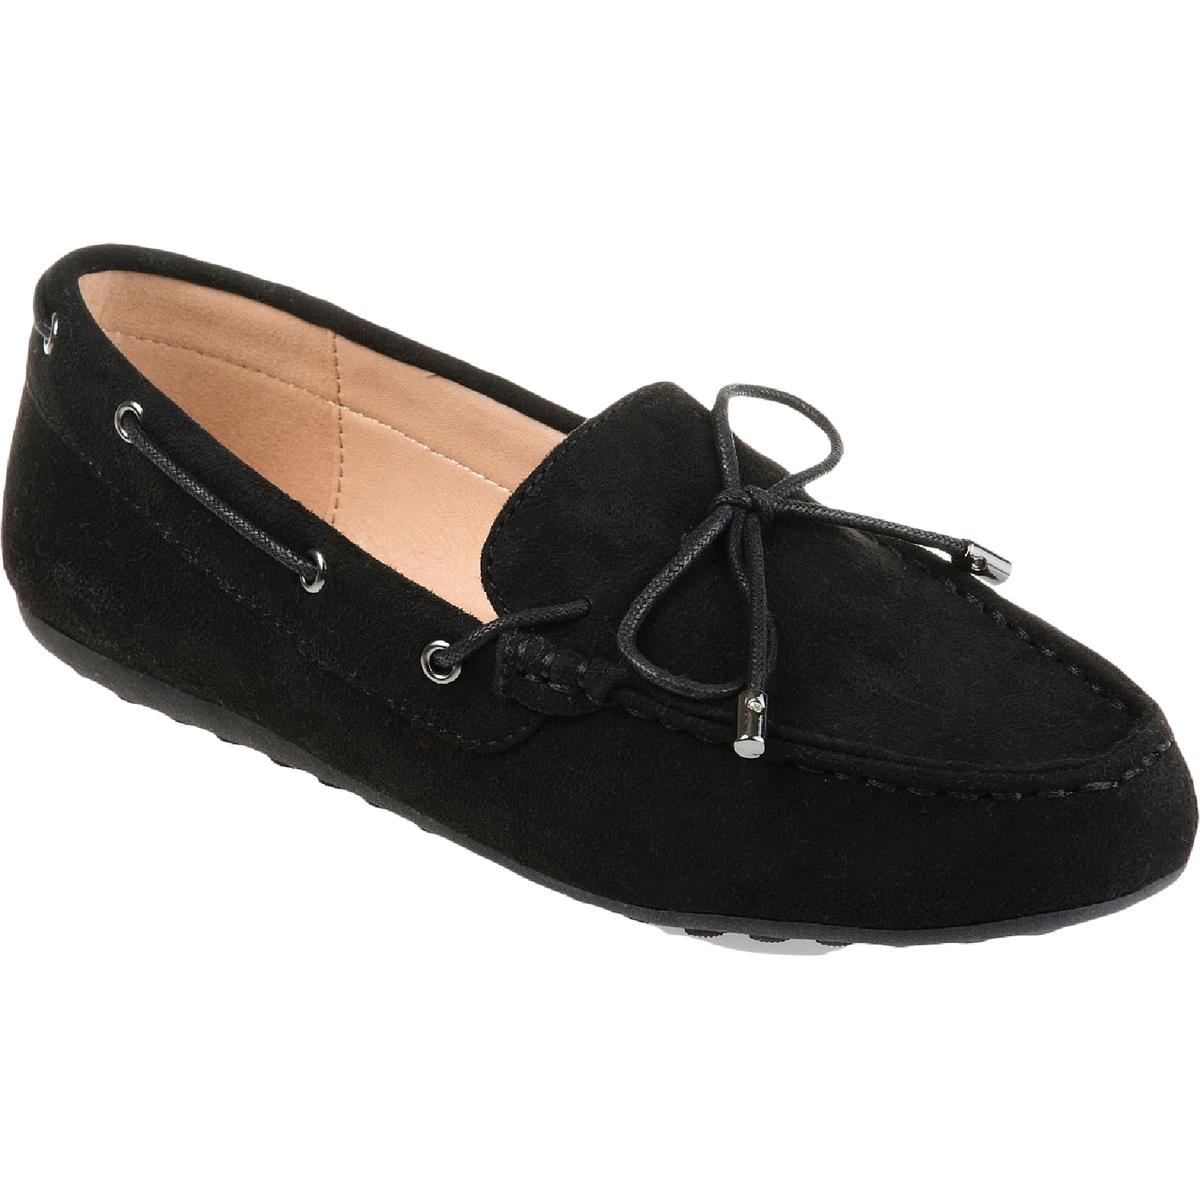 Journee Collection Womens Thatch Suede Slip On Moccasins Loafers Shoes ...